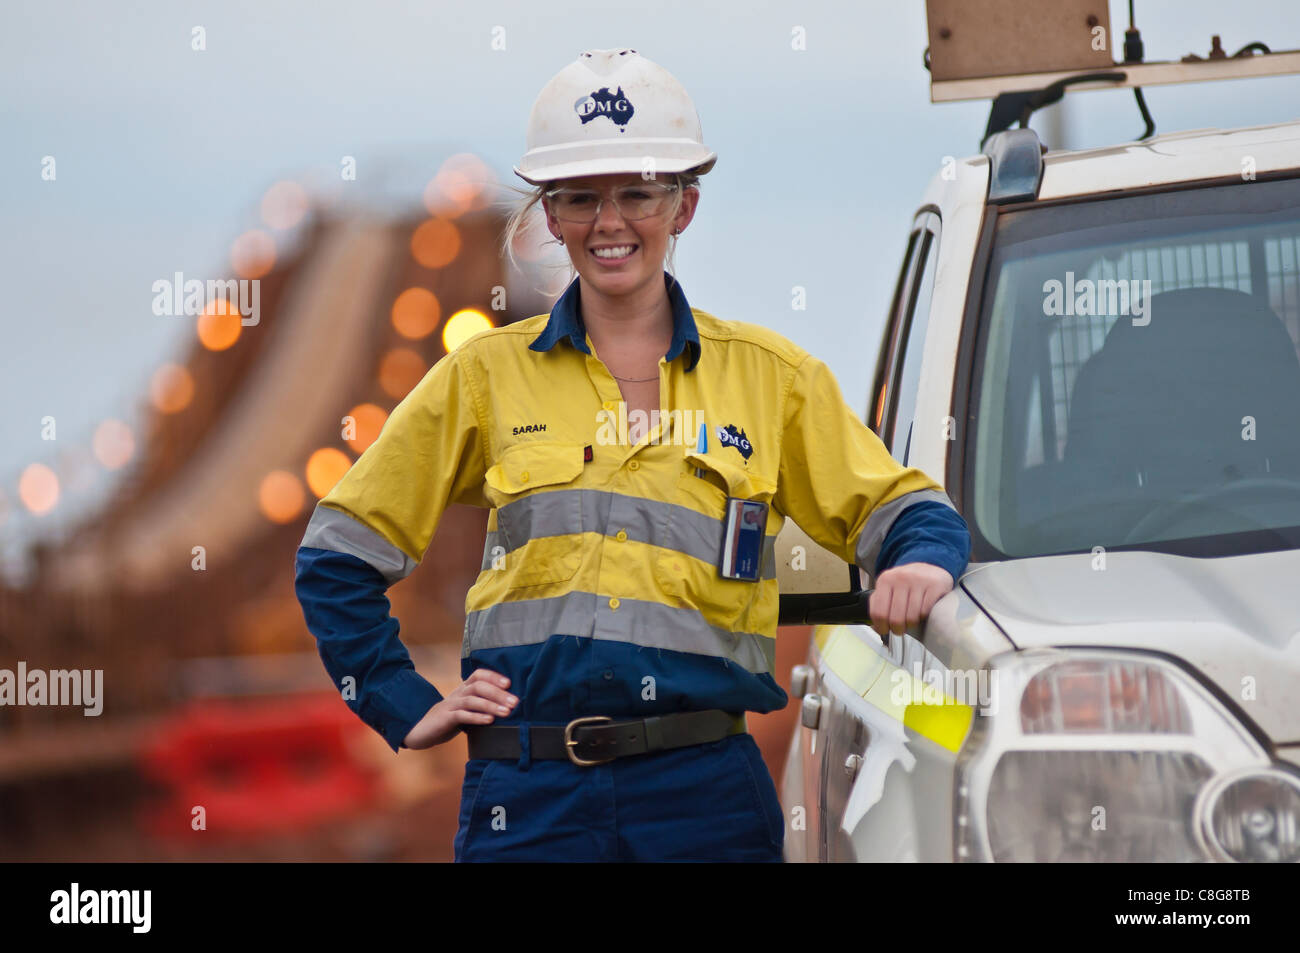 Communications officer with FMG at their iron ore loading facility in Port Hedland, Western Australia Stock Photo